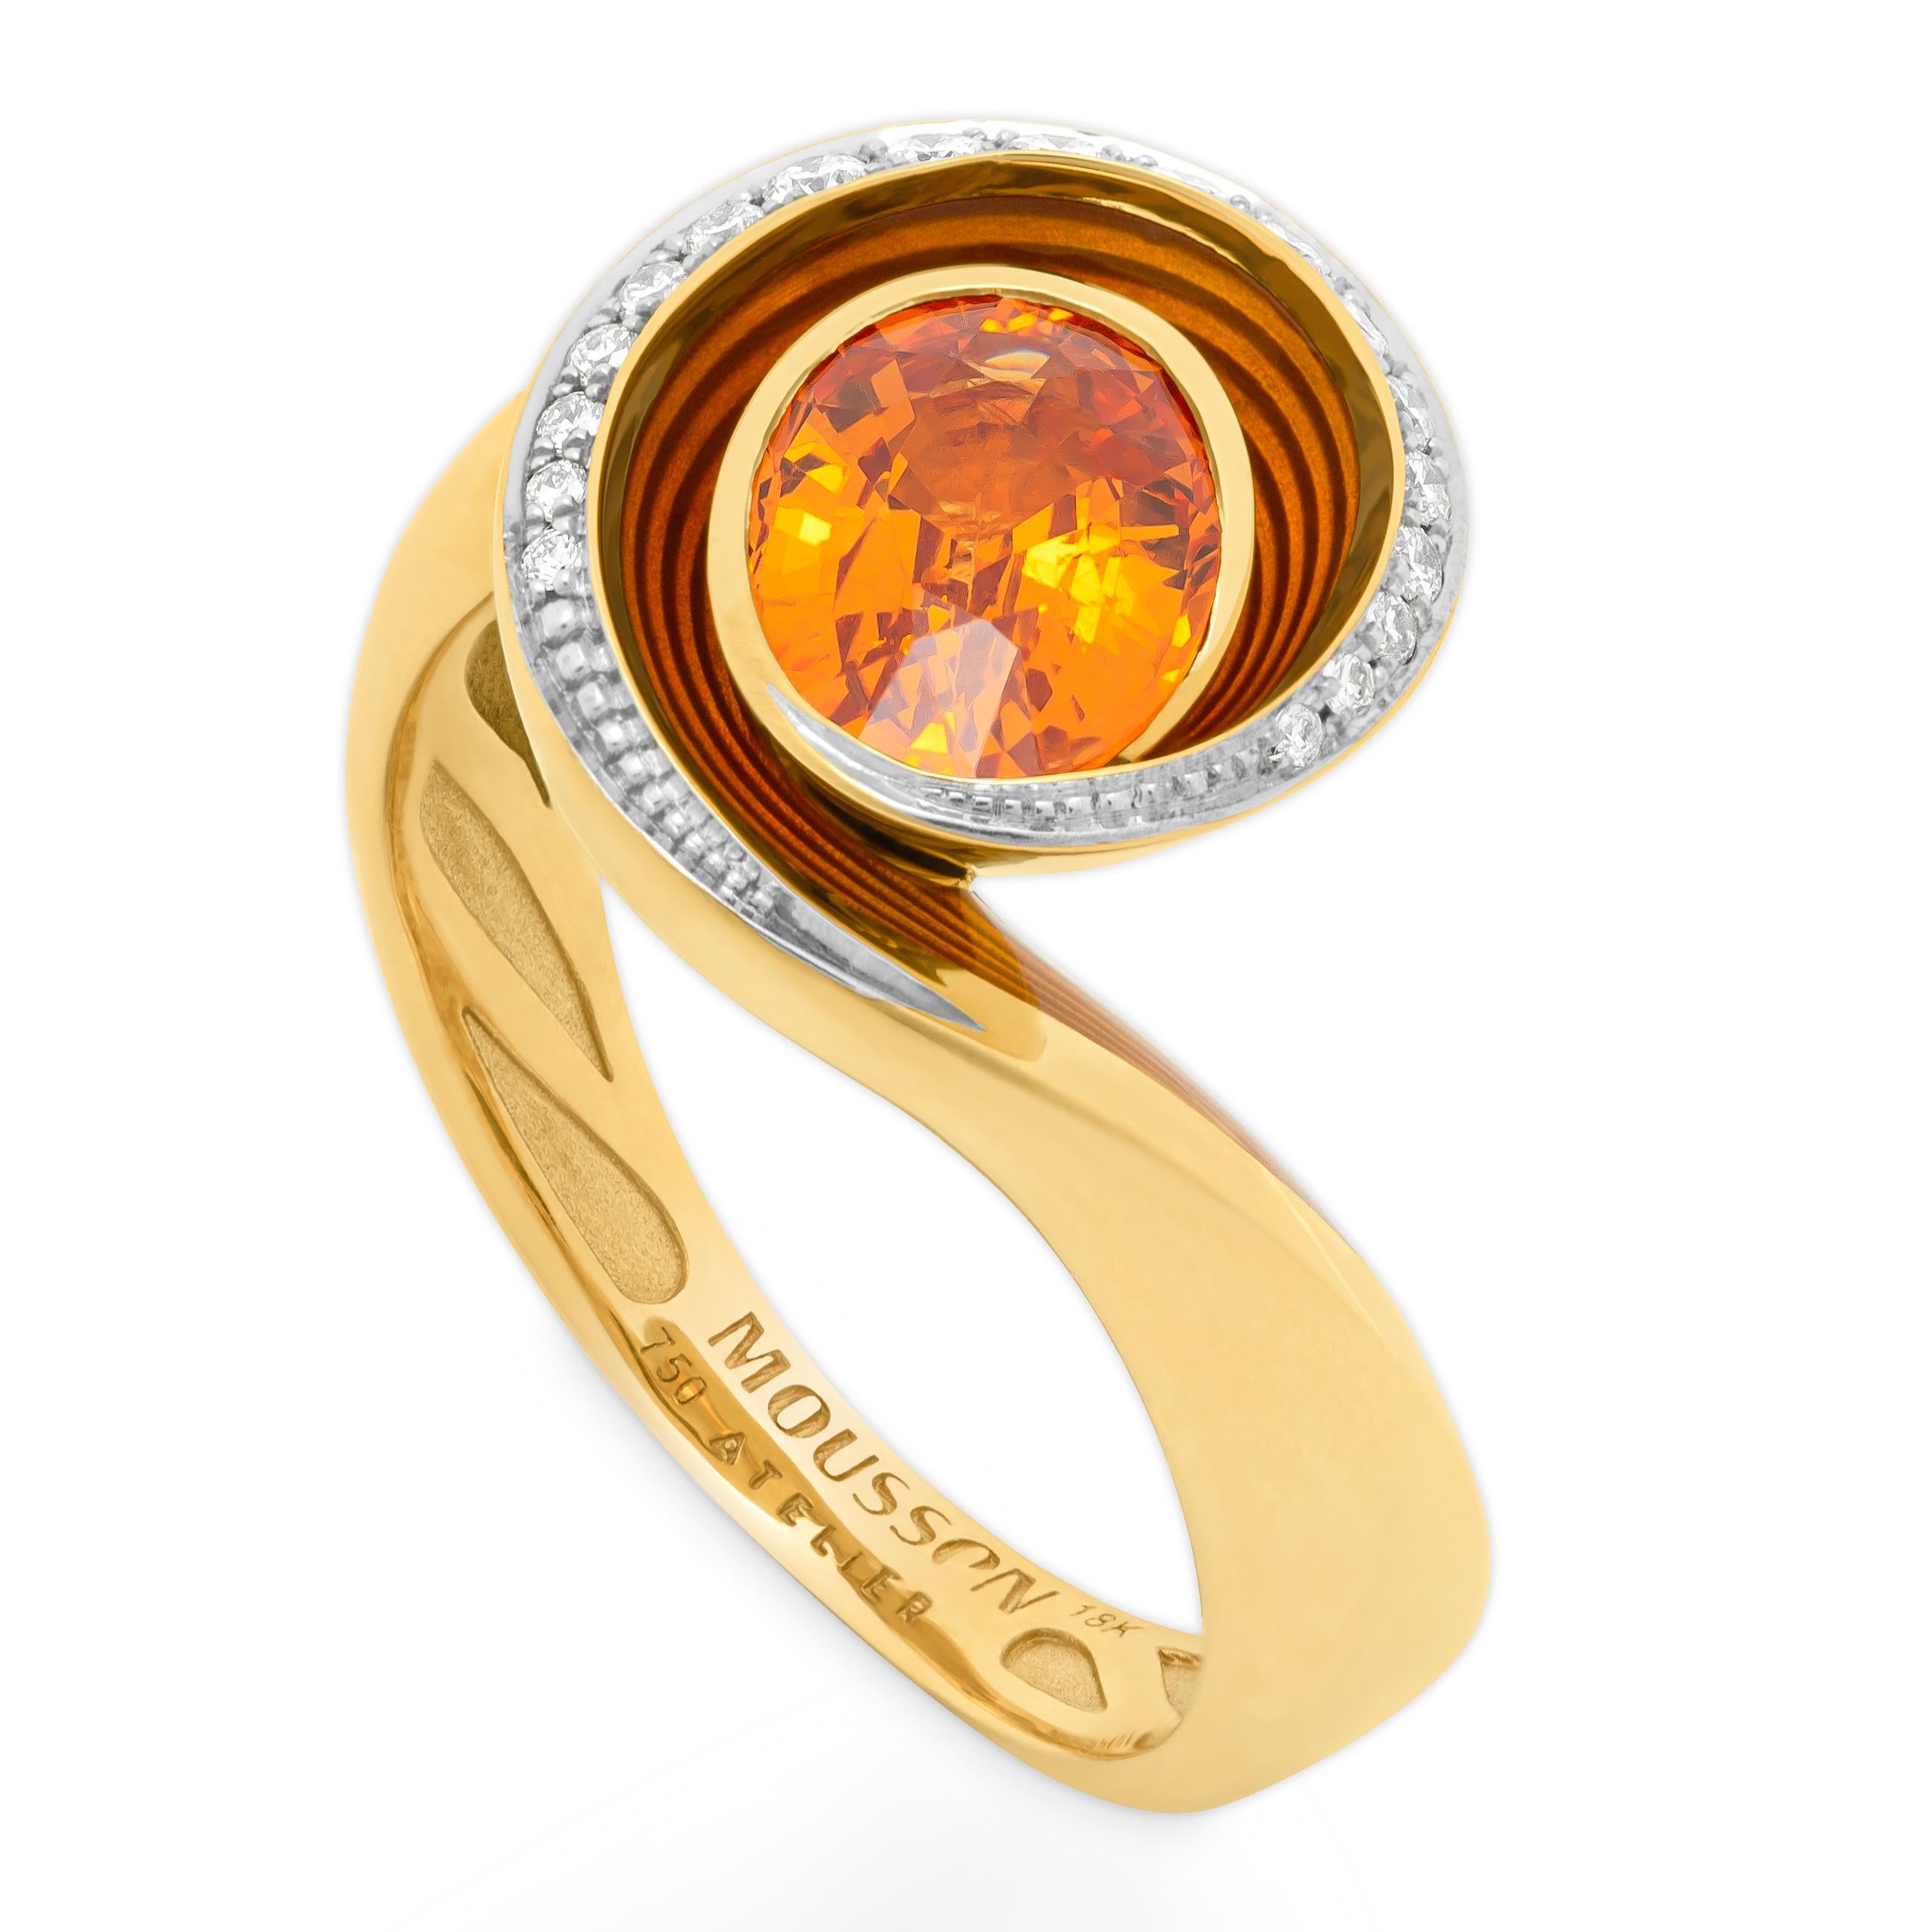 Spessartine Diamonds Enamel 18 Karat Yellow Gold Melted Colors Ring
Our new collection 